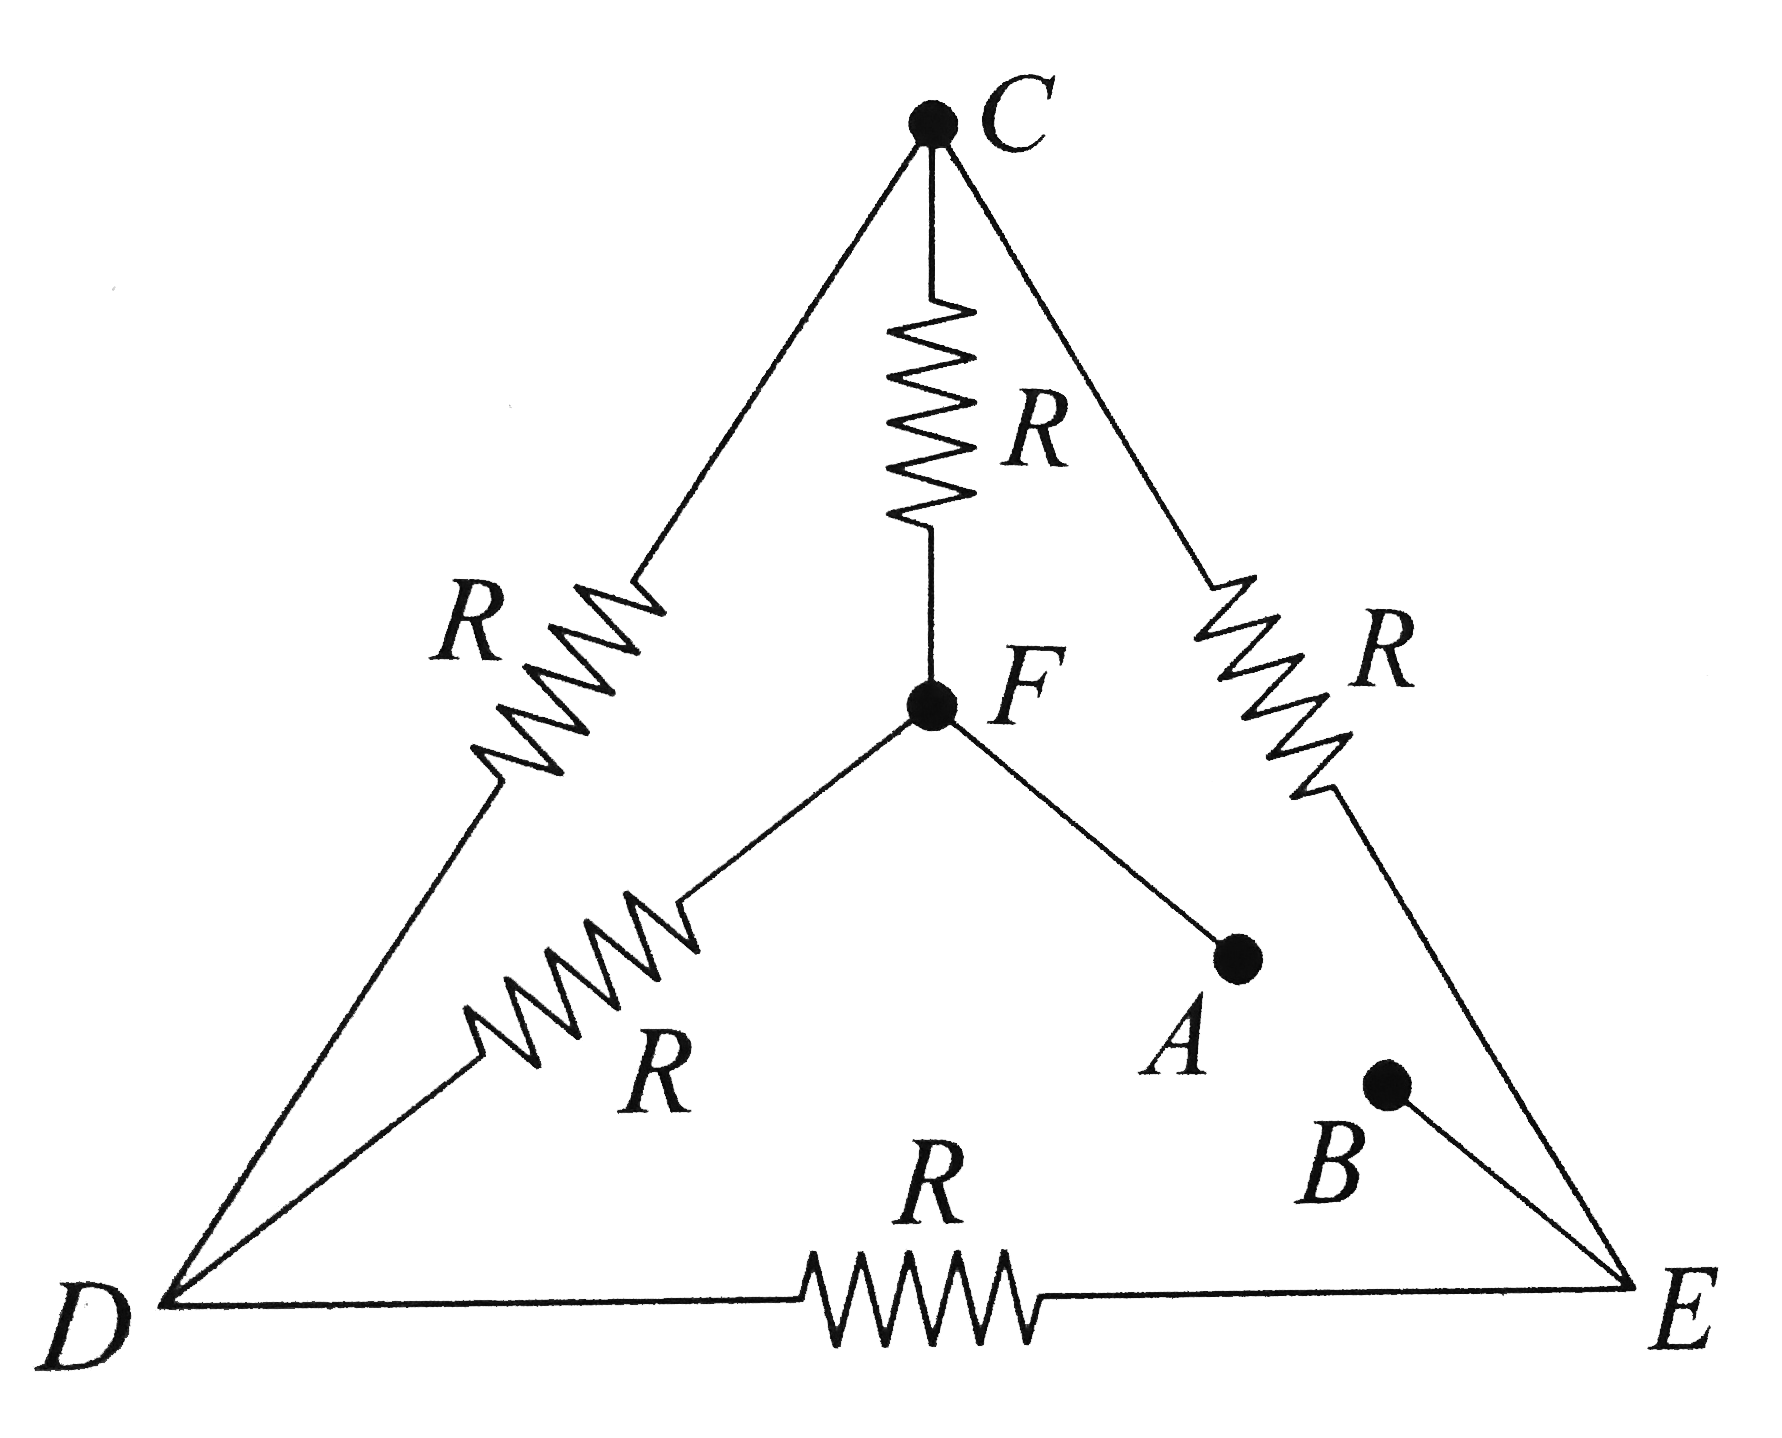 Five equal resistances each of resistance R are connected as shown in the figure. A battery of V volts is connected between A and B. The current flowing in AFCEB will be  
(a) (3V)/(R)
(b) (V)/(R)
(c) (V)/(2R)
(d) (2V)/(R)